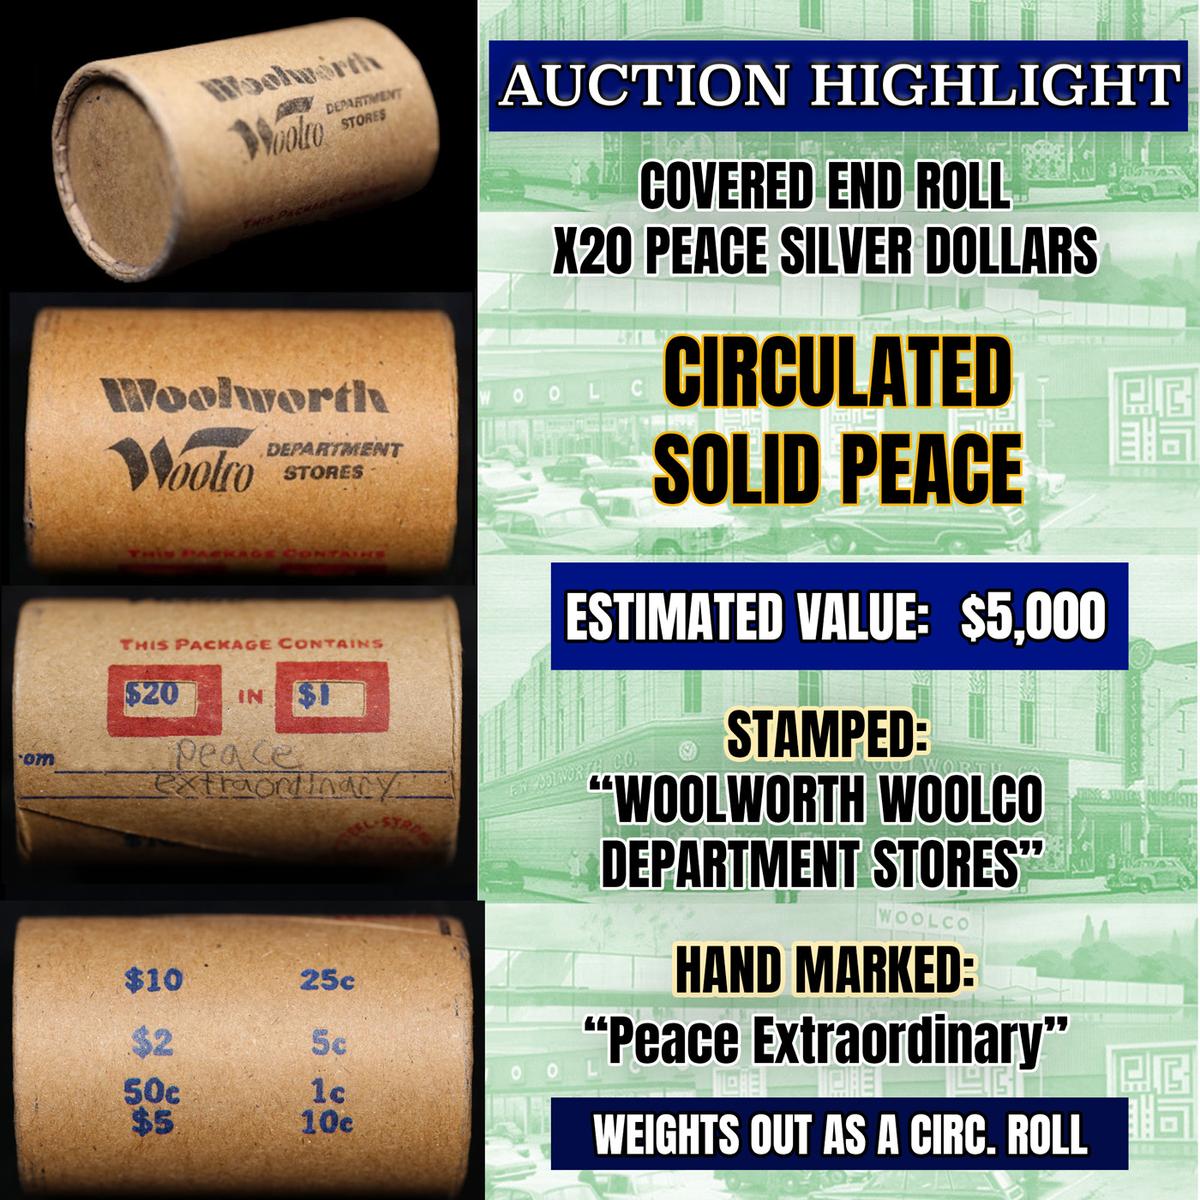 High Value! - Covered End Roll - Marked " Peace Extraordinary" - Weight shows x20 Coins (FC)